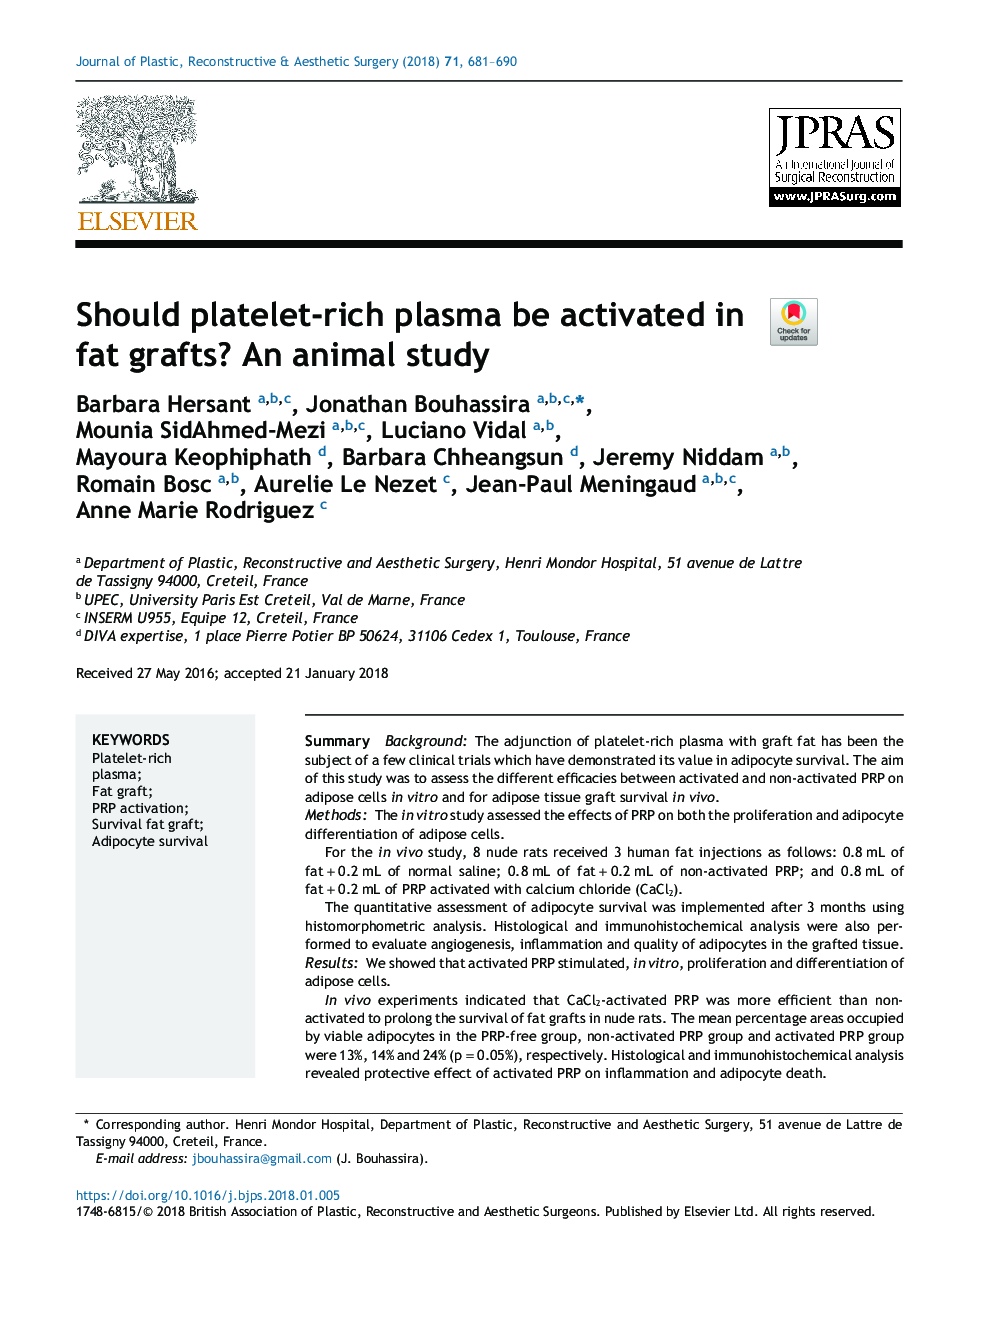 Should platelet-rich plasma be activated in fat grafts? An animal study